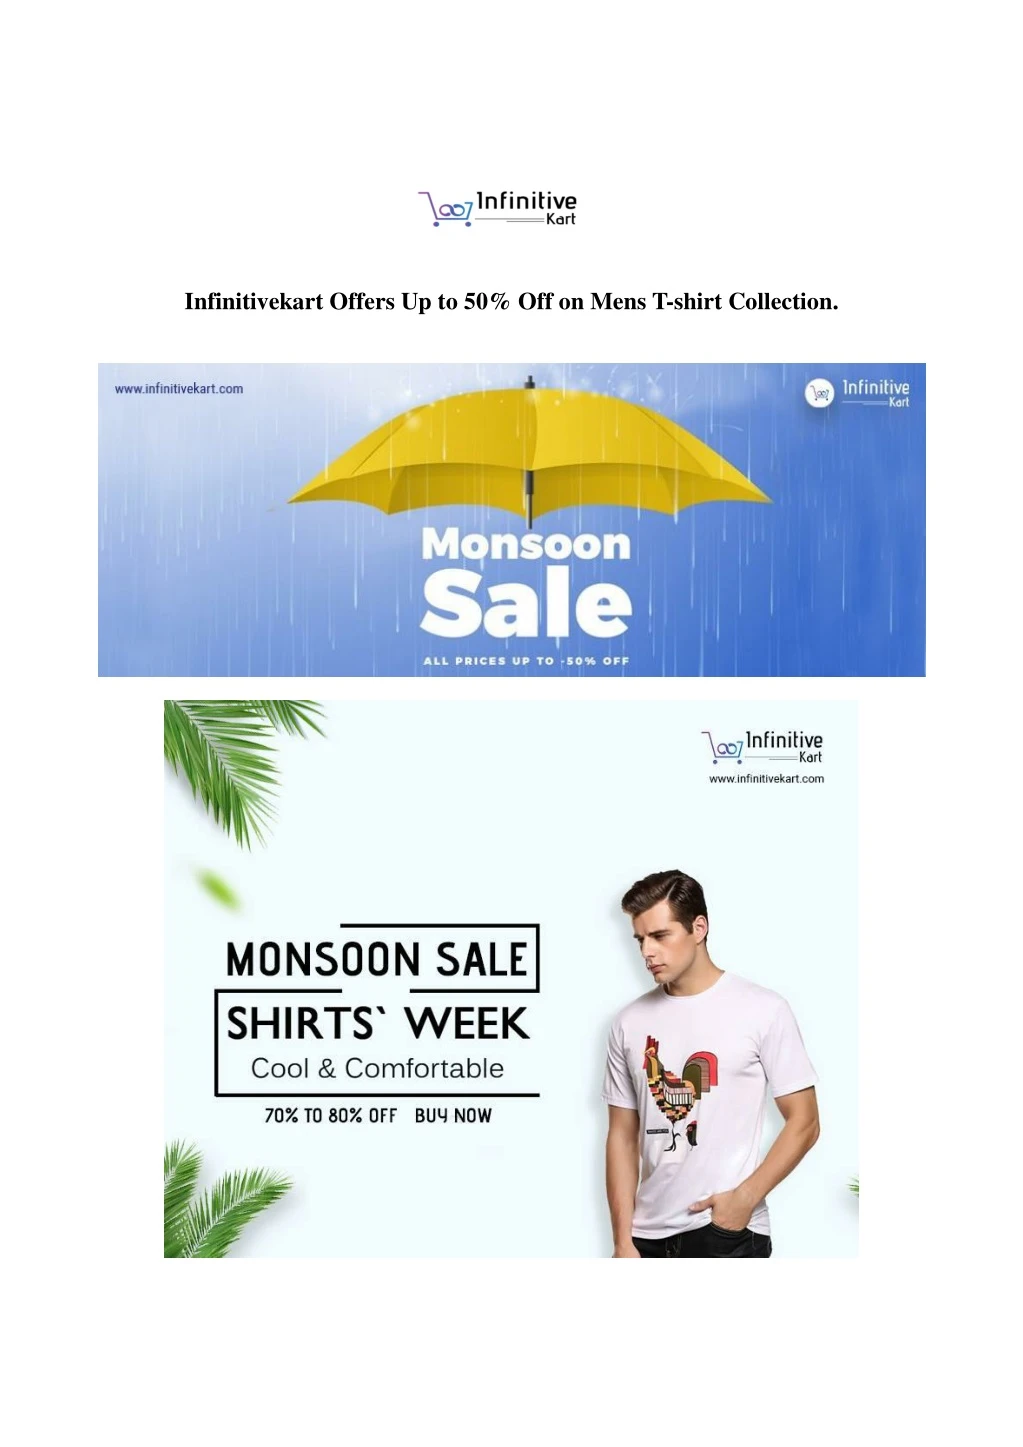 infinitivekart offers up to 50 off on mens